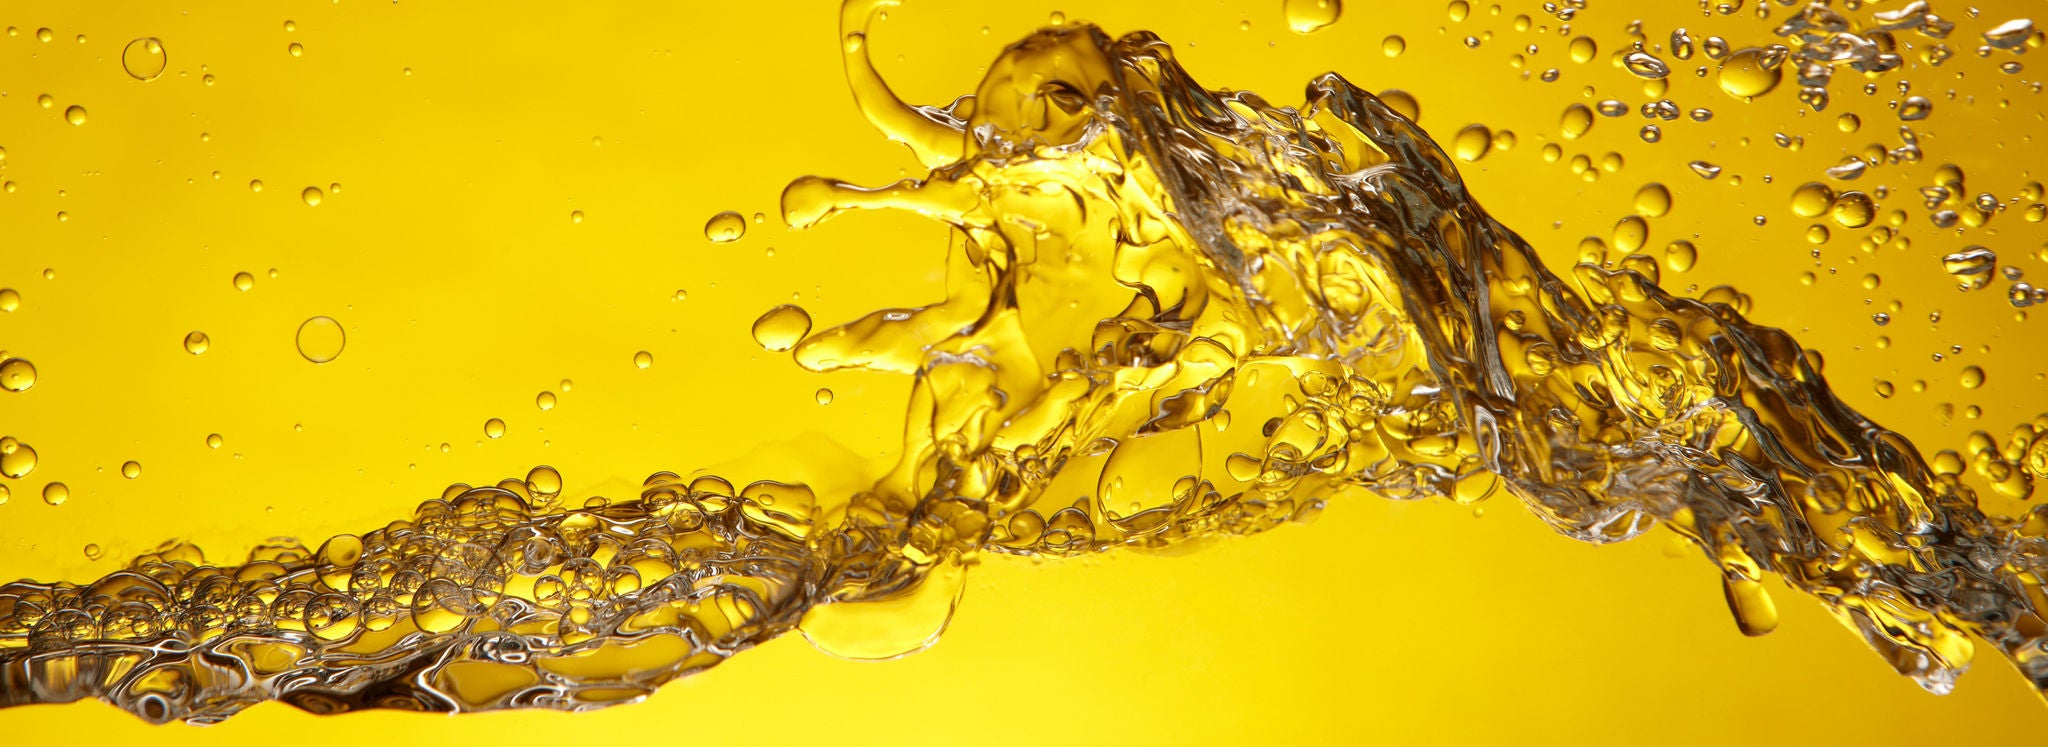 Artistic image with a yellow background of liquid used in biodiesel transportation splashing across screen